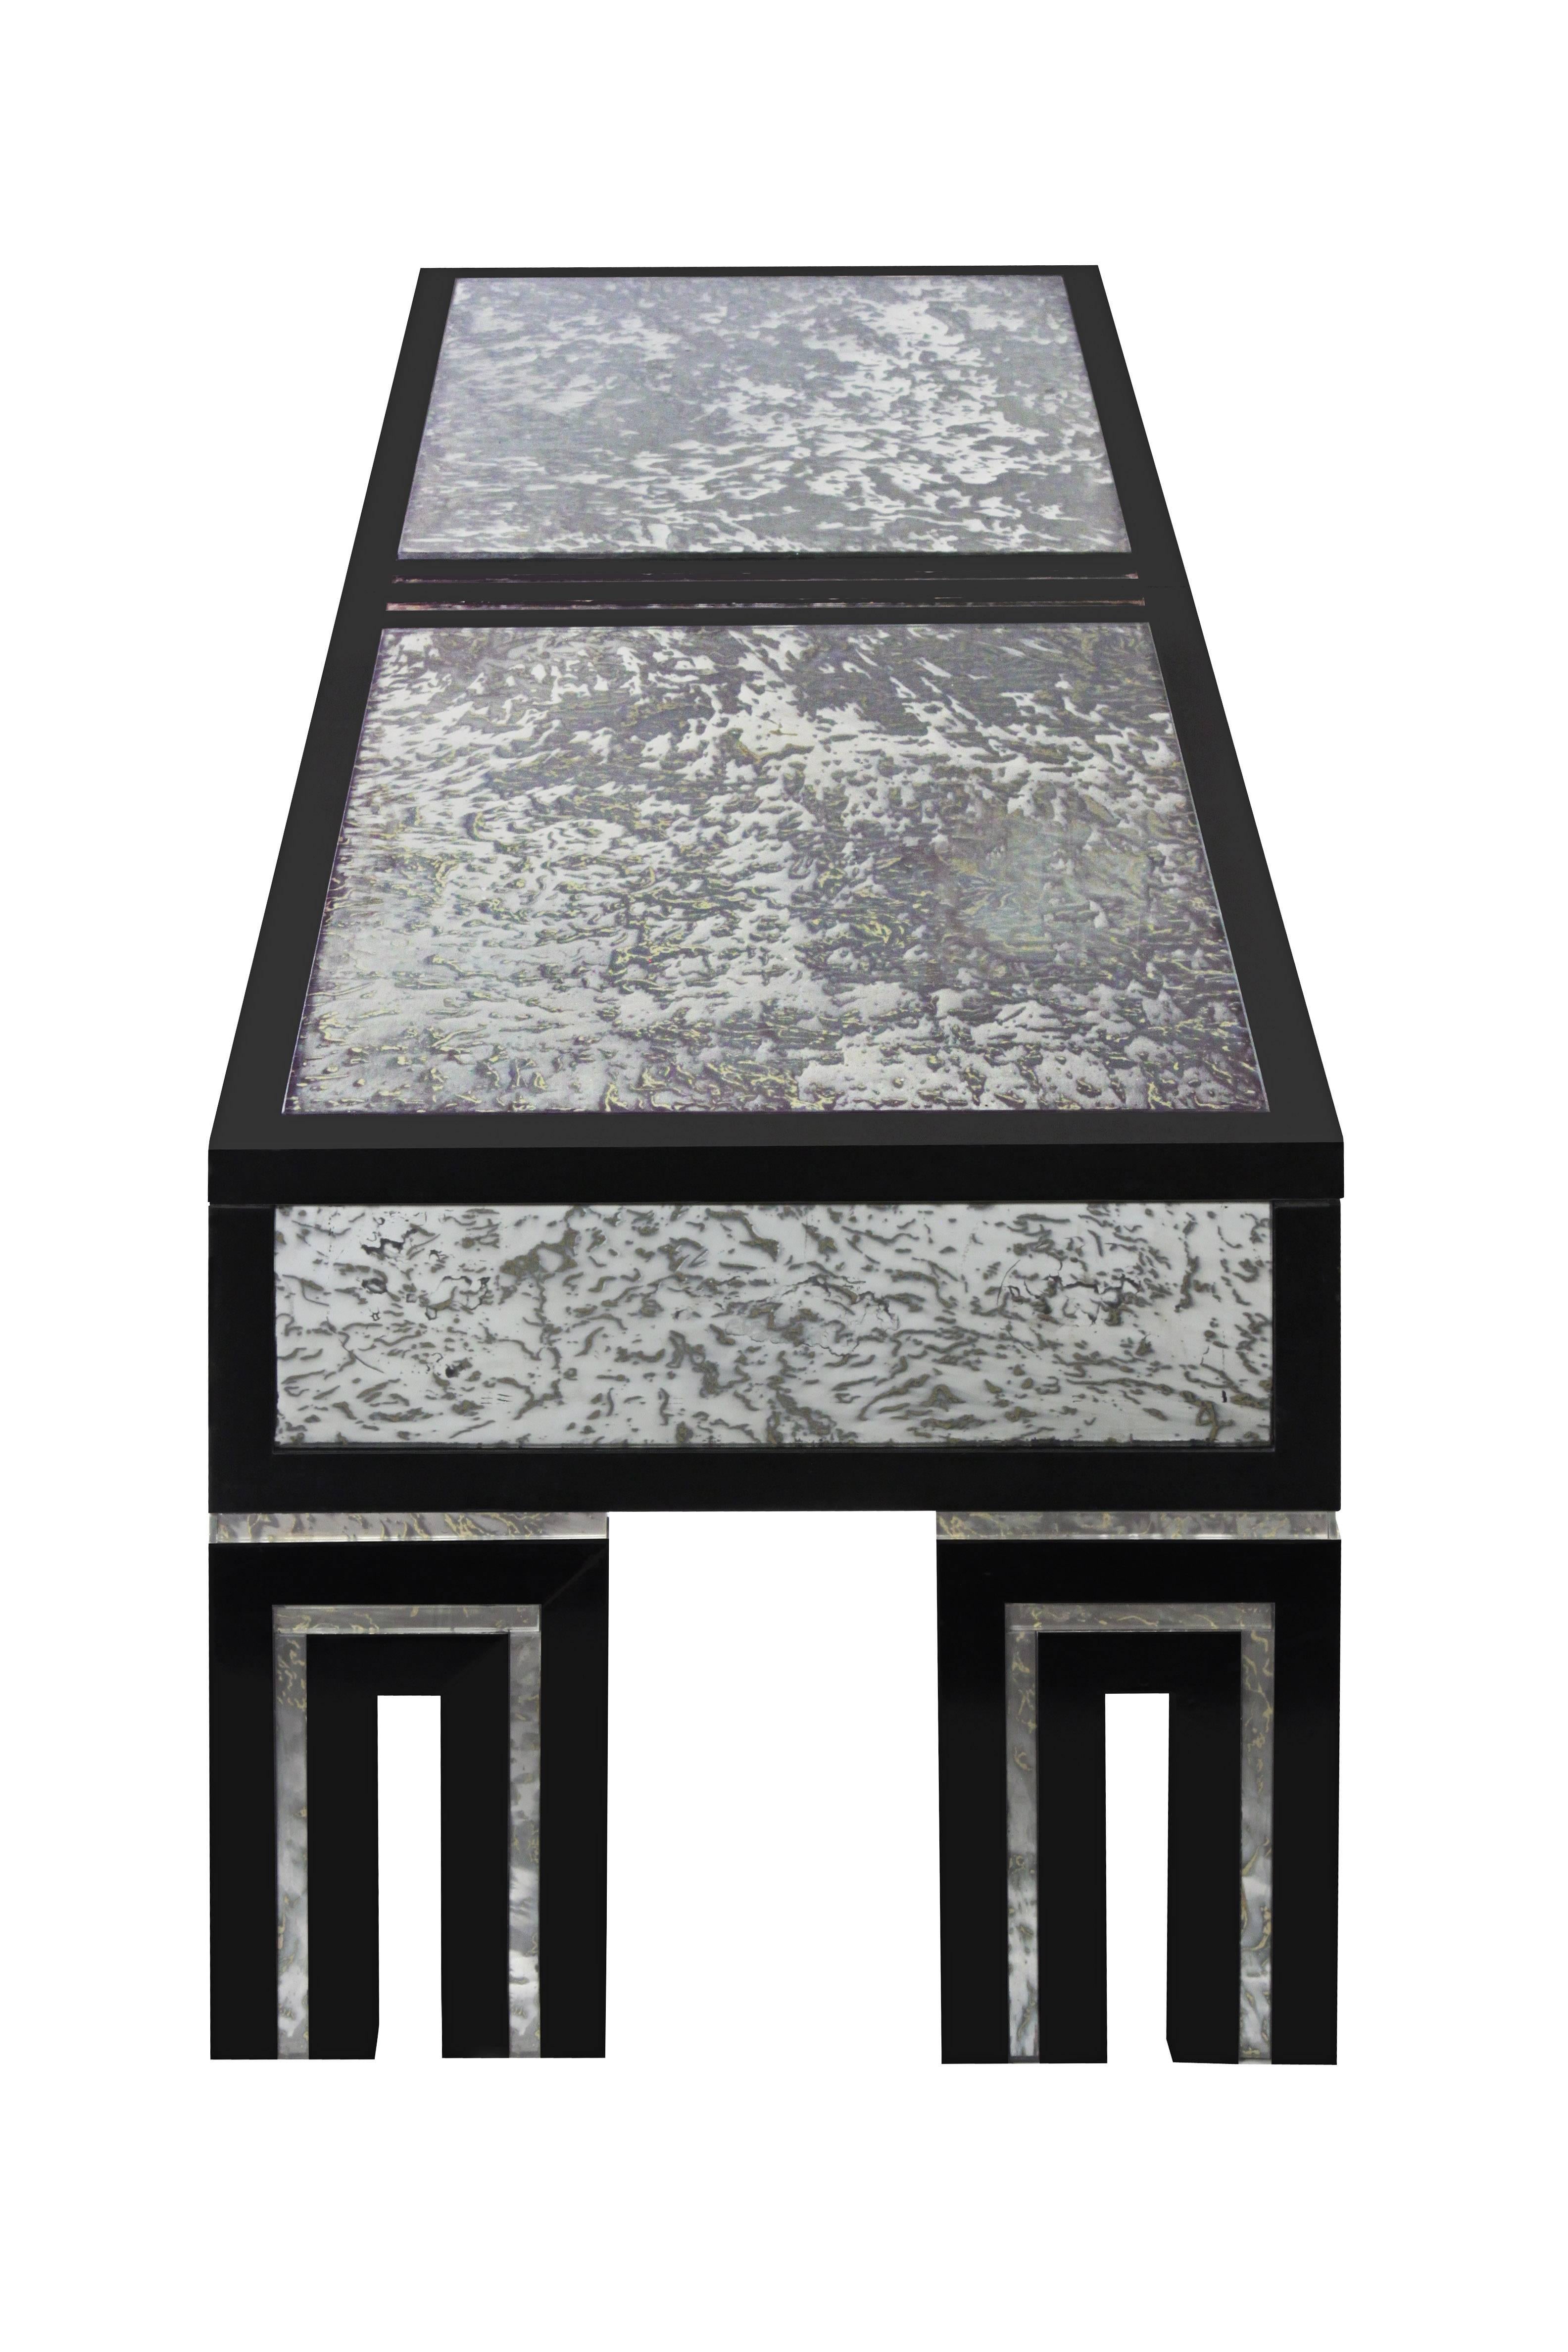 American Ebonized Coffee Table with Mottled Antique Glass by James Mont For Sale